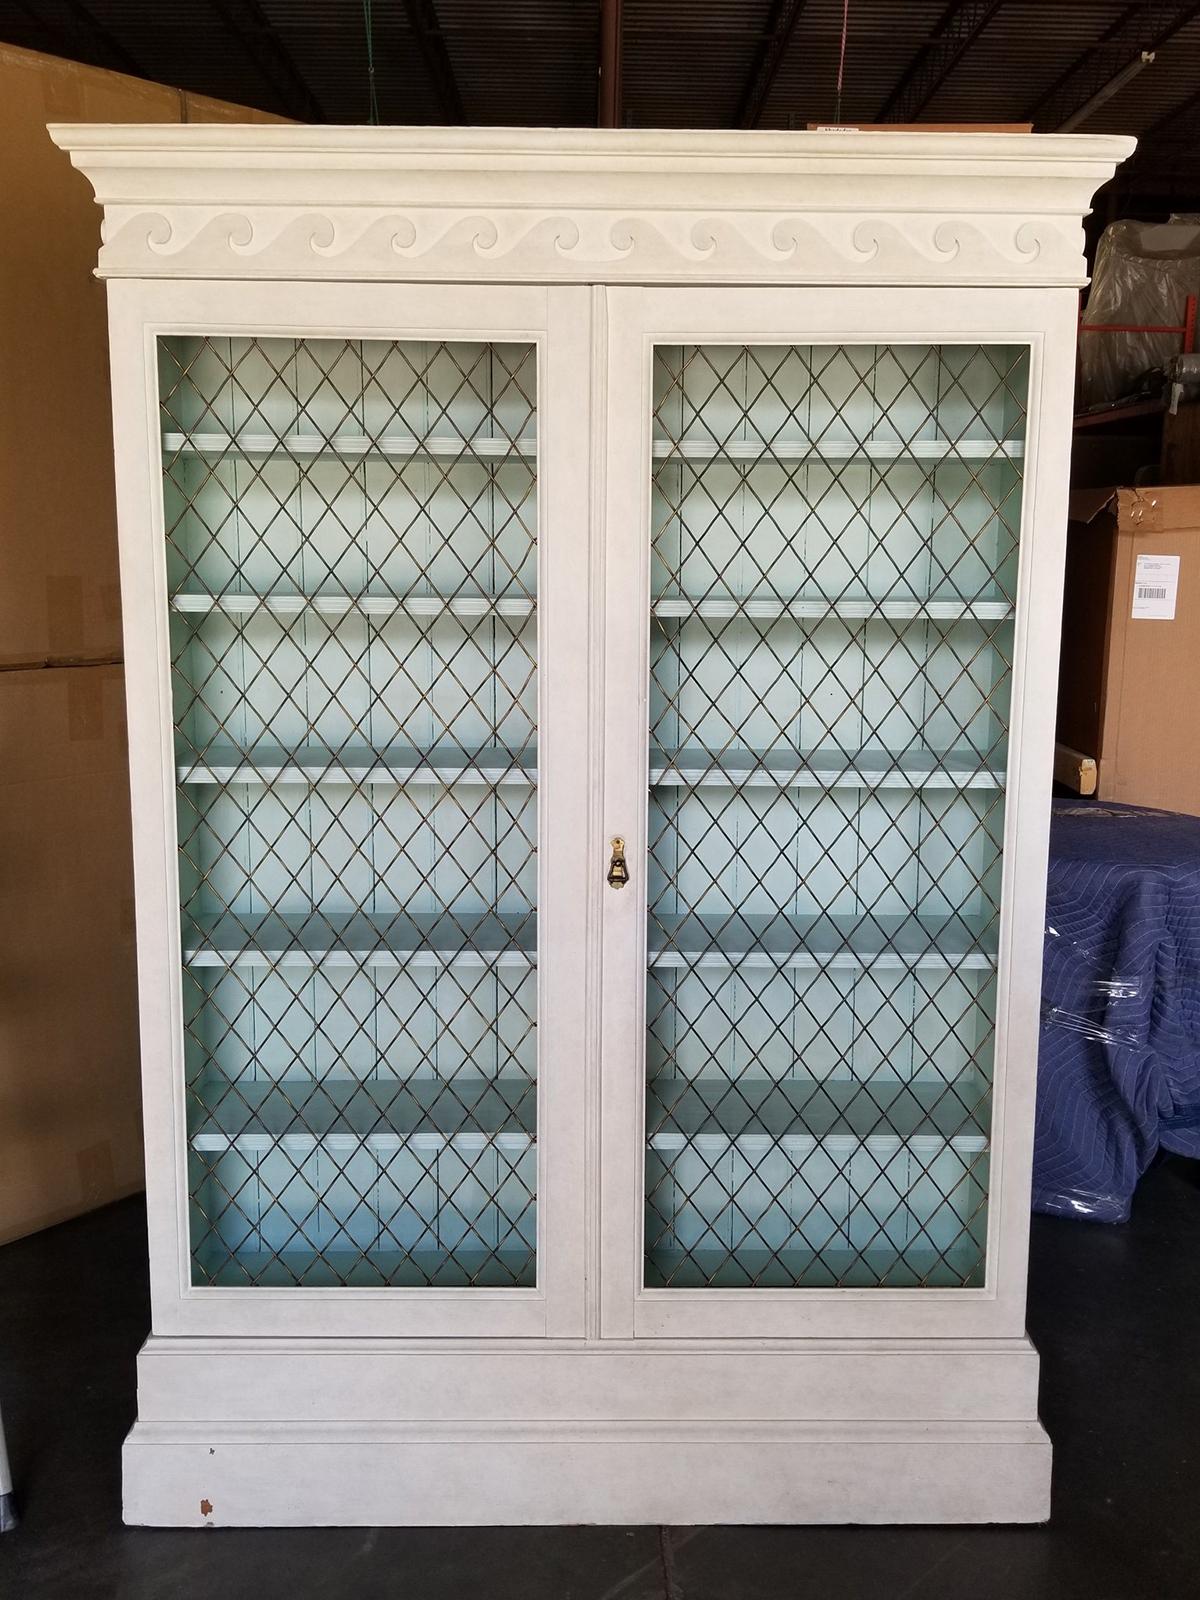 Late 19th-early 20th century George III style pine bookcase with bronze mesh doors and vitruvian scroll, custom hand painted finish.
Overall dimensions: 50.75